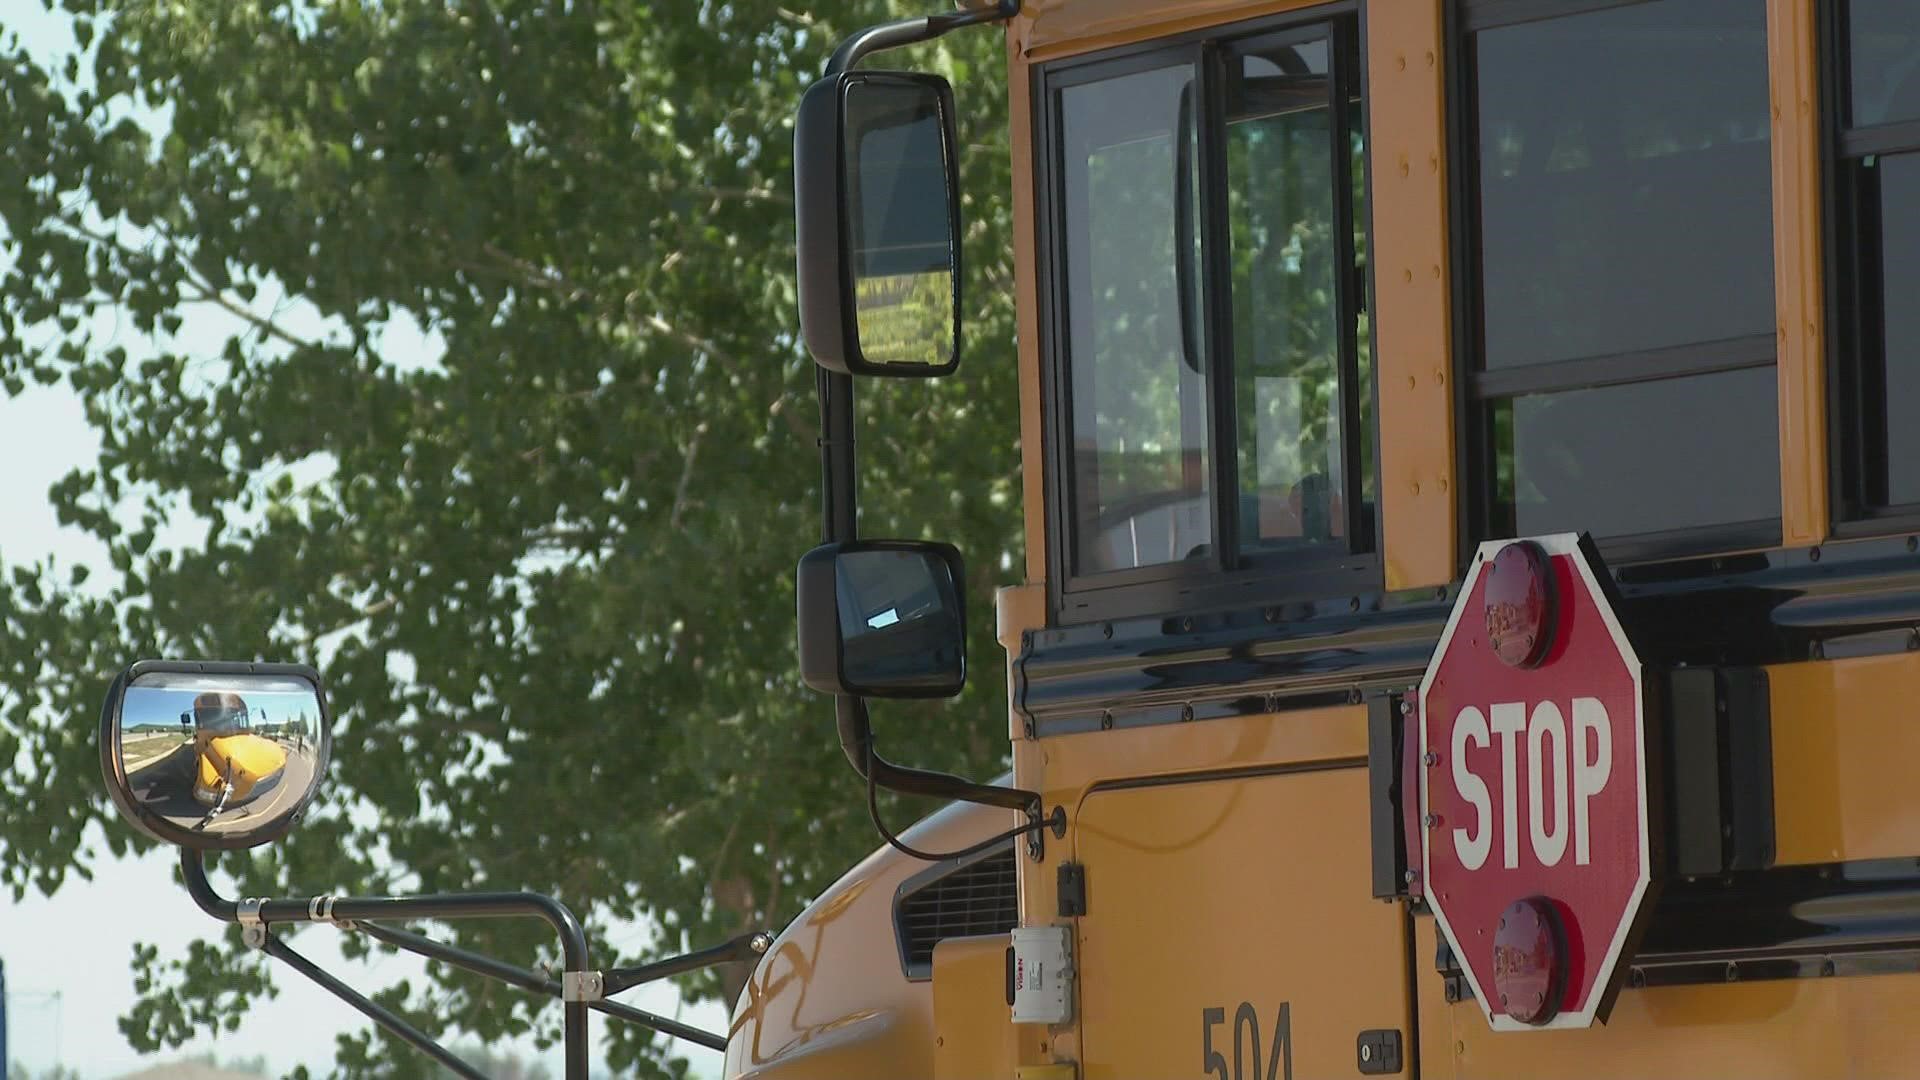 Tuesday marks the first day of a new year for students in Jefferson County. Like many school districts, they are continuing to deal with a bus driver shortage.